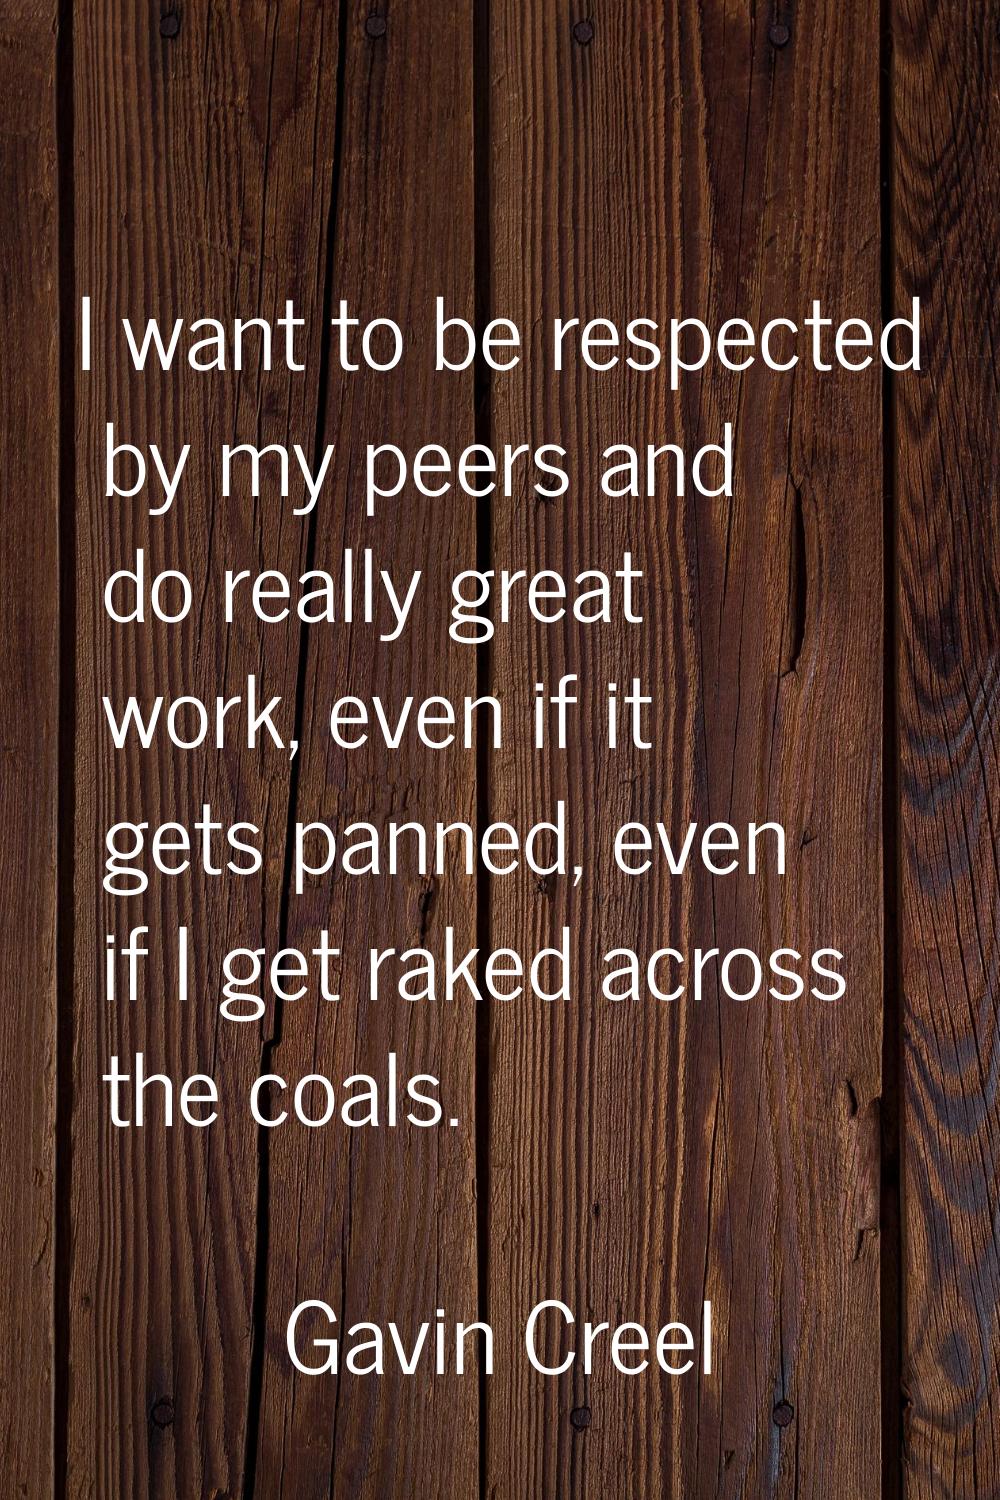 I want to be respected by my peers and do really great work, even if it gets panned, even if I get 